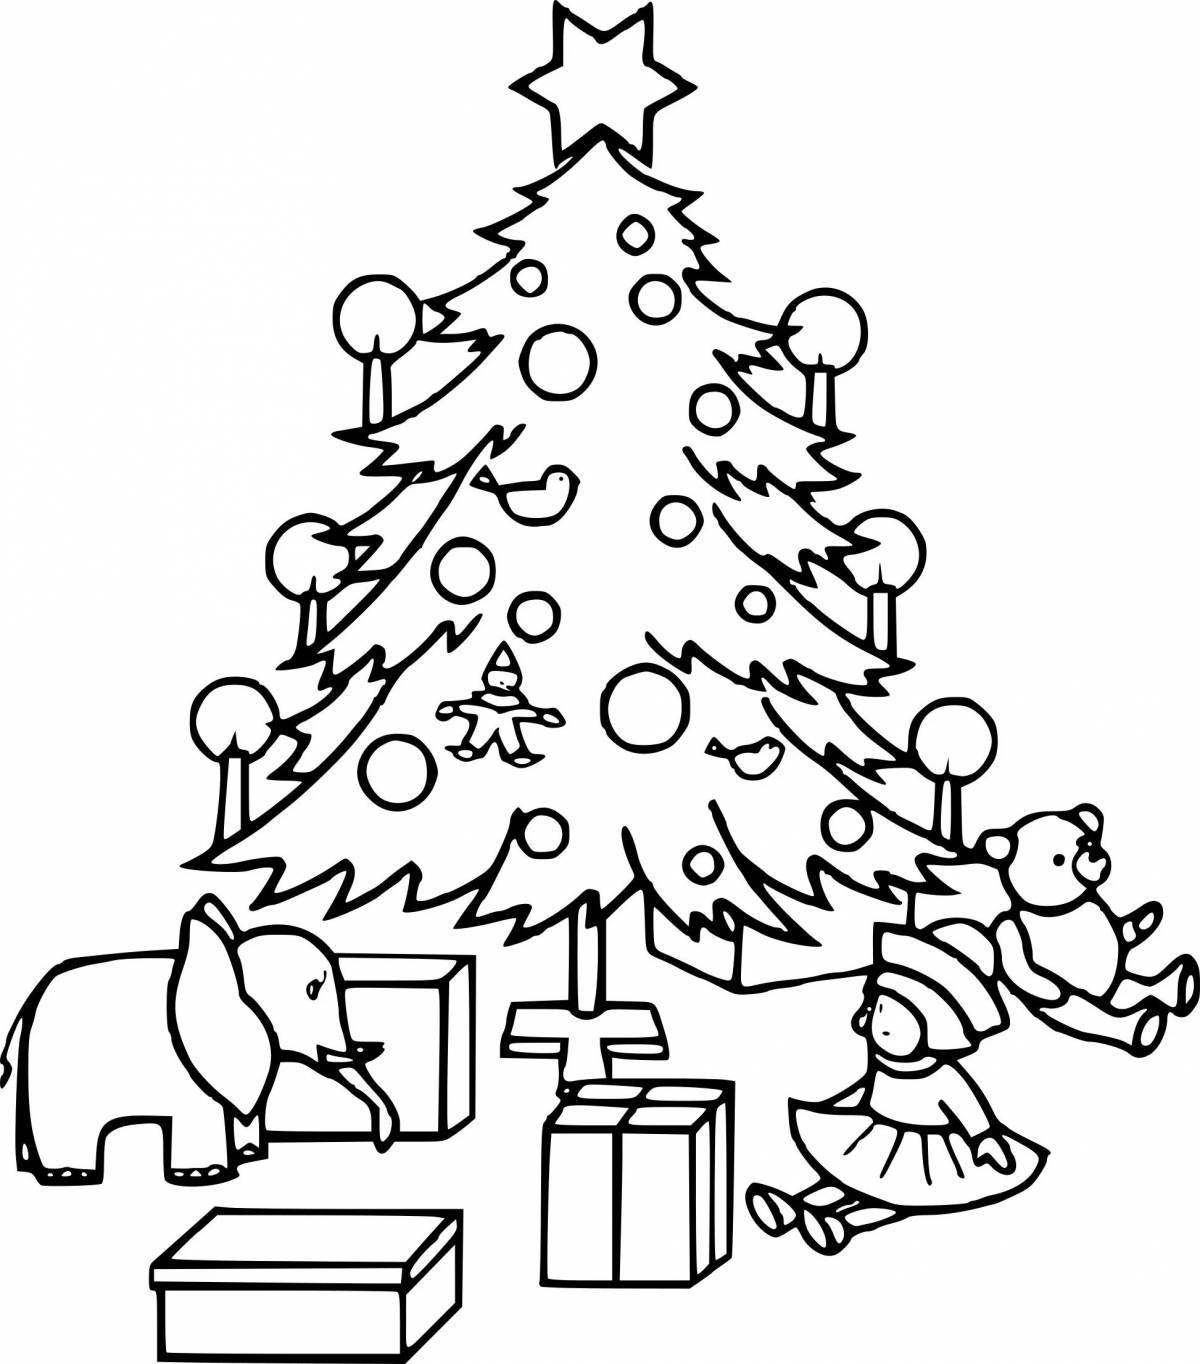 Luminous Christmas tree coloring book for 5-6 year olds